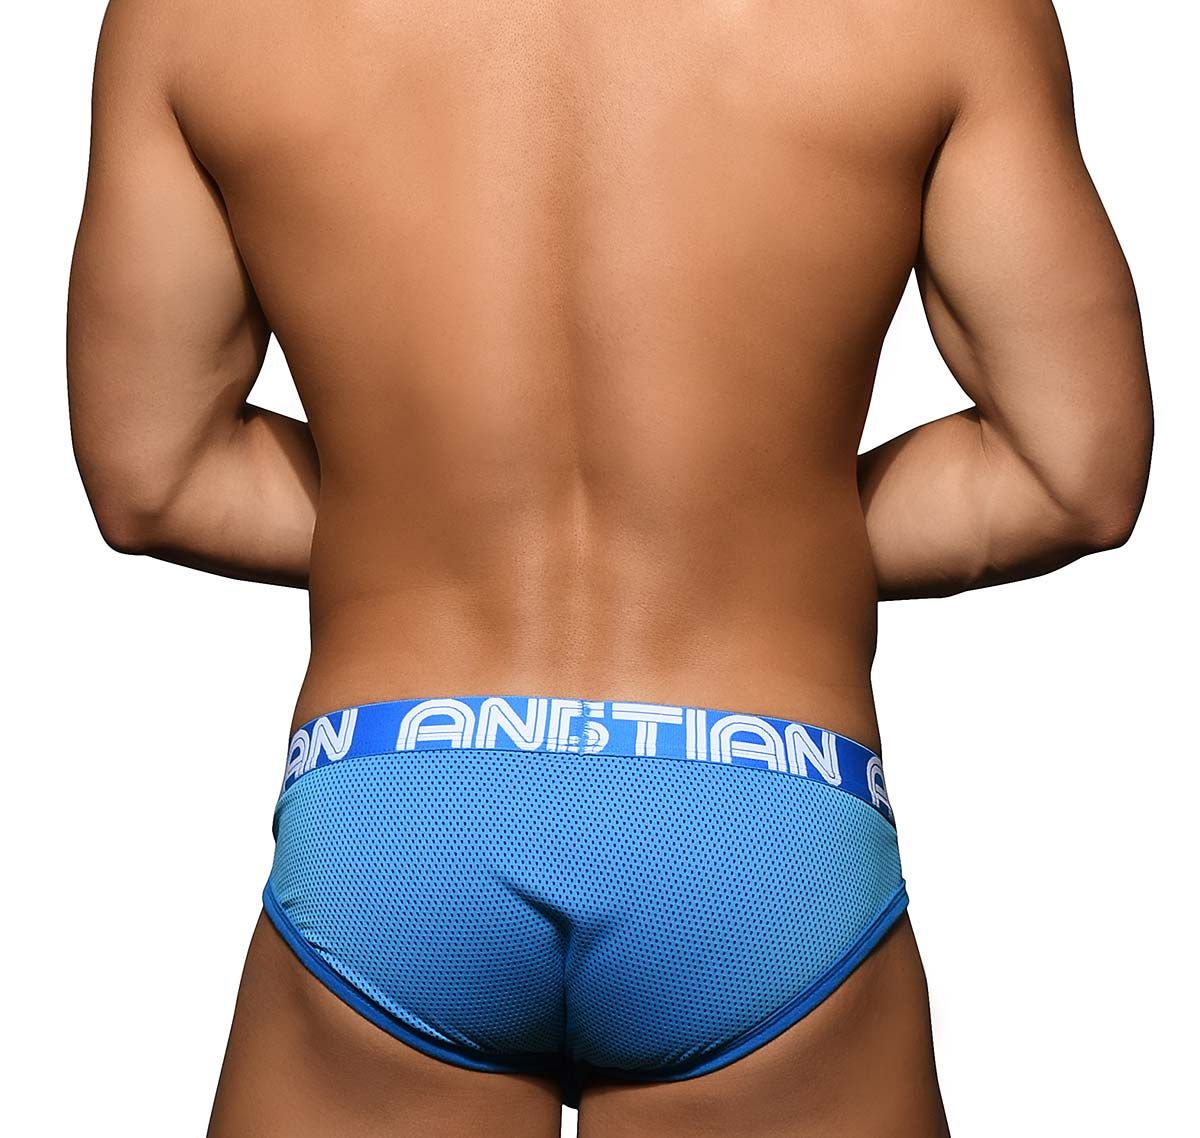 Andrew Christian Slip CANDY POP MESH FRAME BRIEF w/ Almost Naked 92760, azul